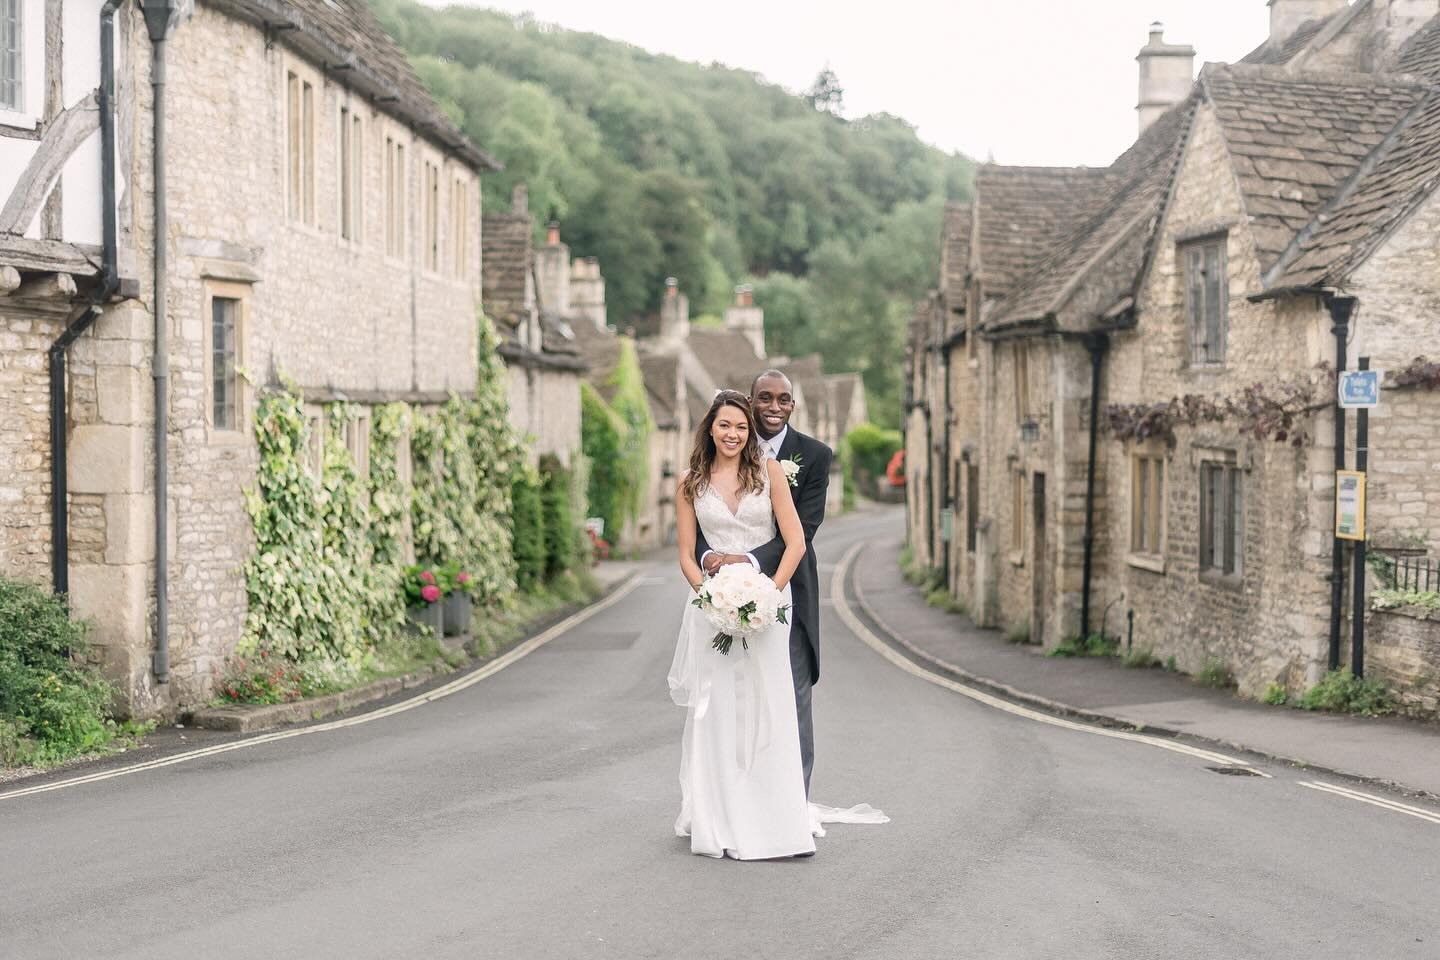 CASTLE COMBE 
Hidden amidst the rolling hills of the Cotswolds &amp; officially named the prettiest village in England @castlecombeengland is home to @themanor_house &amp; offers a picture-perfect backdrop for romantic wedding photographs. 
Wedding P